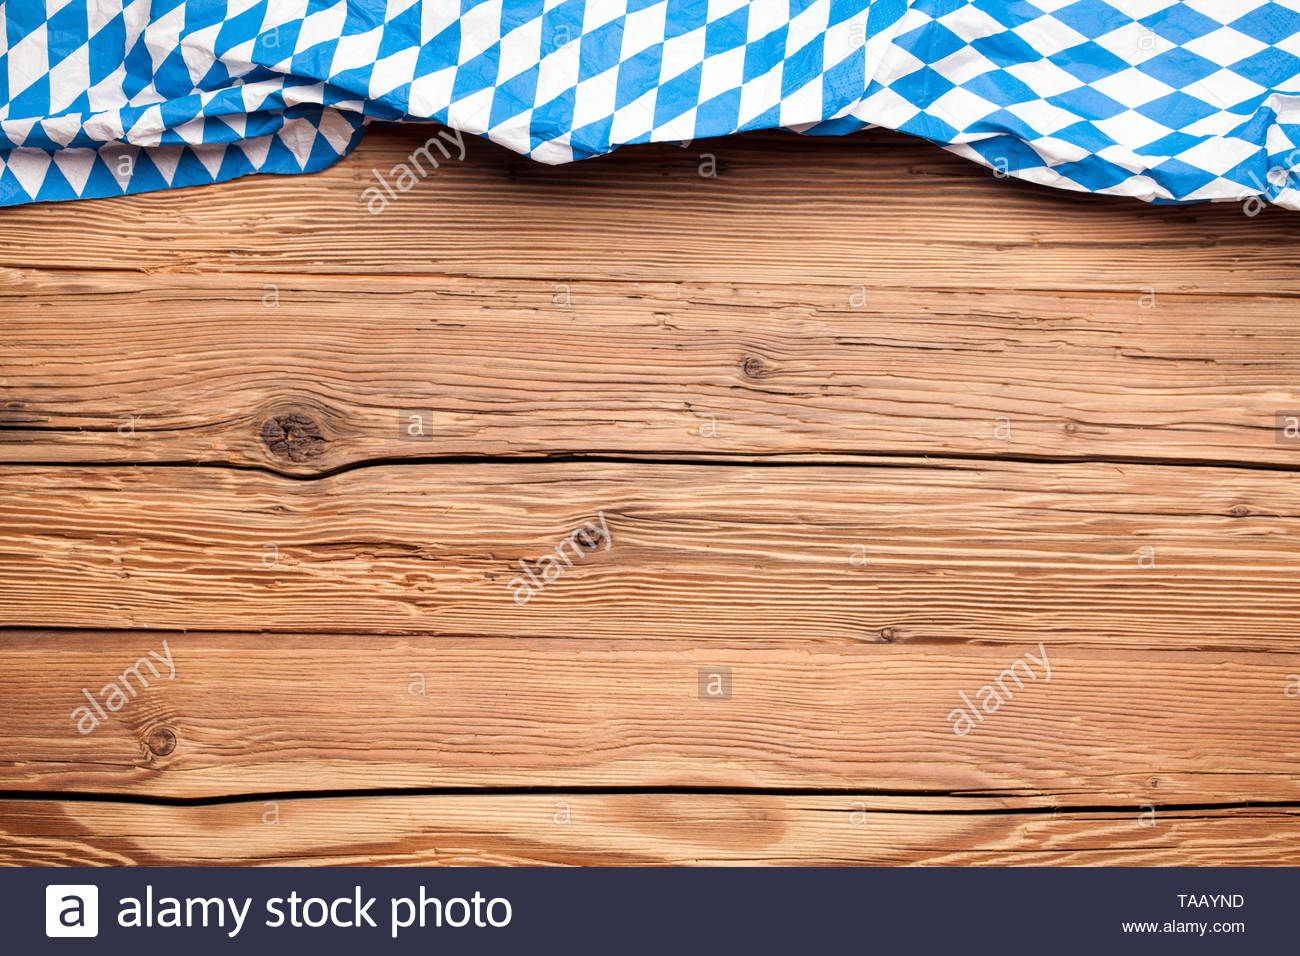 Oktoberfest Tablecloth On An Old Rustic Wooden Background Stock